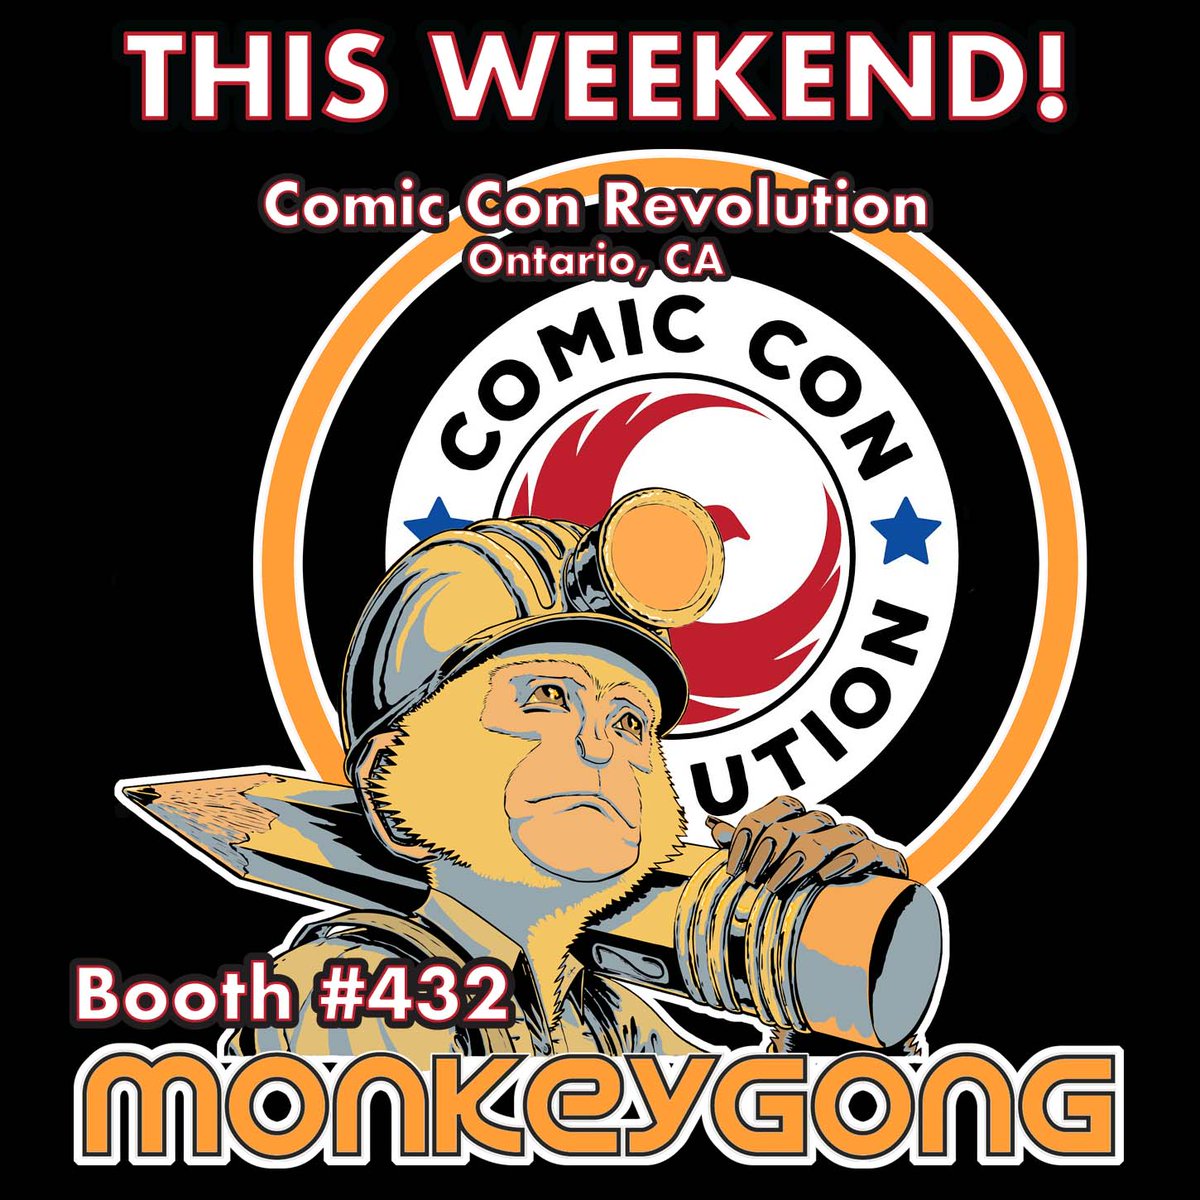 #thisweekend I’m tabling at #comiconrevolution in #ontariocalifornia - splitting a big booth with Chris Mancini from White Cat Entertainment - if you’re in the #inlandempire & love #comicbooks we will have a great setup of multiple books!! #joinus for #indiecomics & #art 🤓